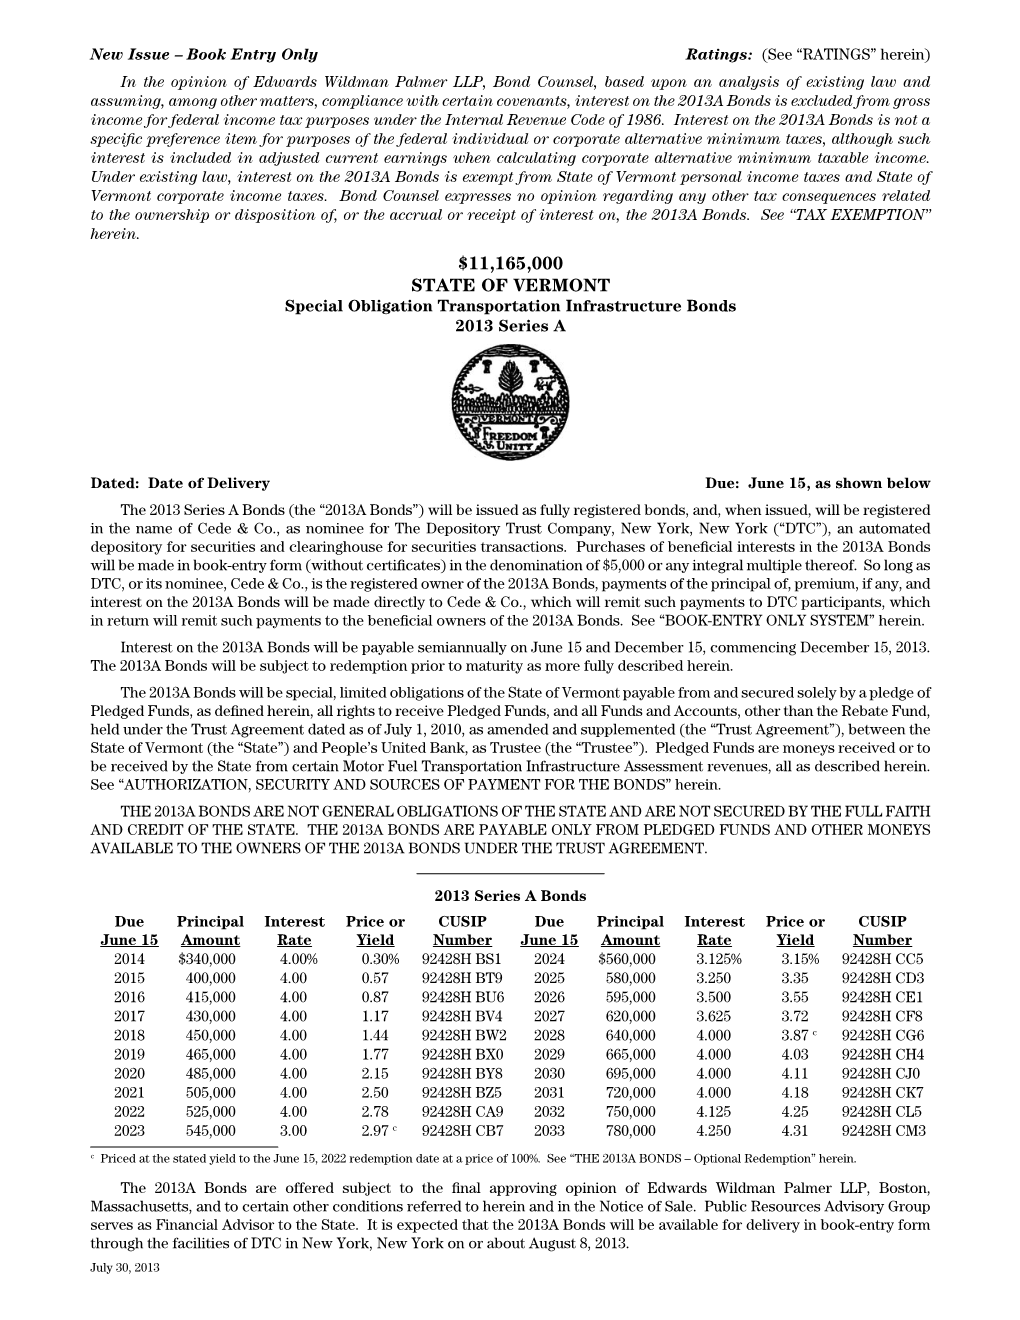 State of Vermont Personal Income Taxes and State of Vermont Corporate Income Taxes